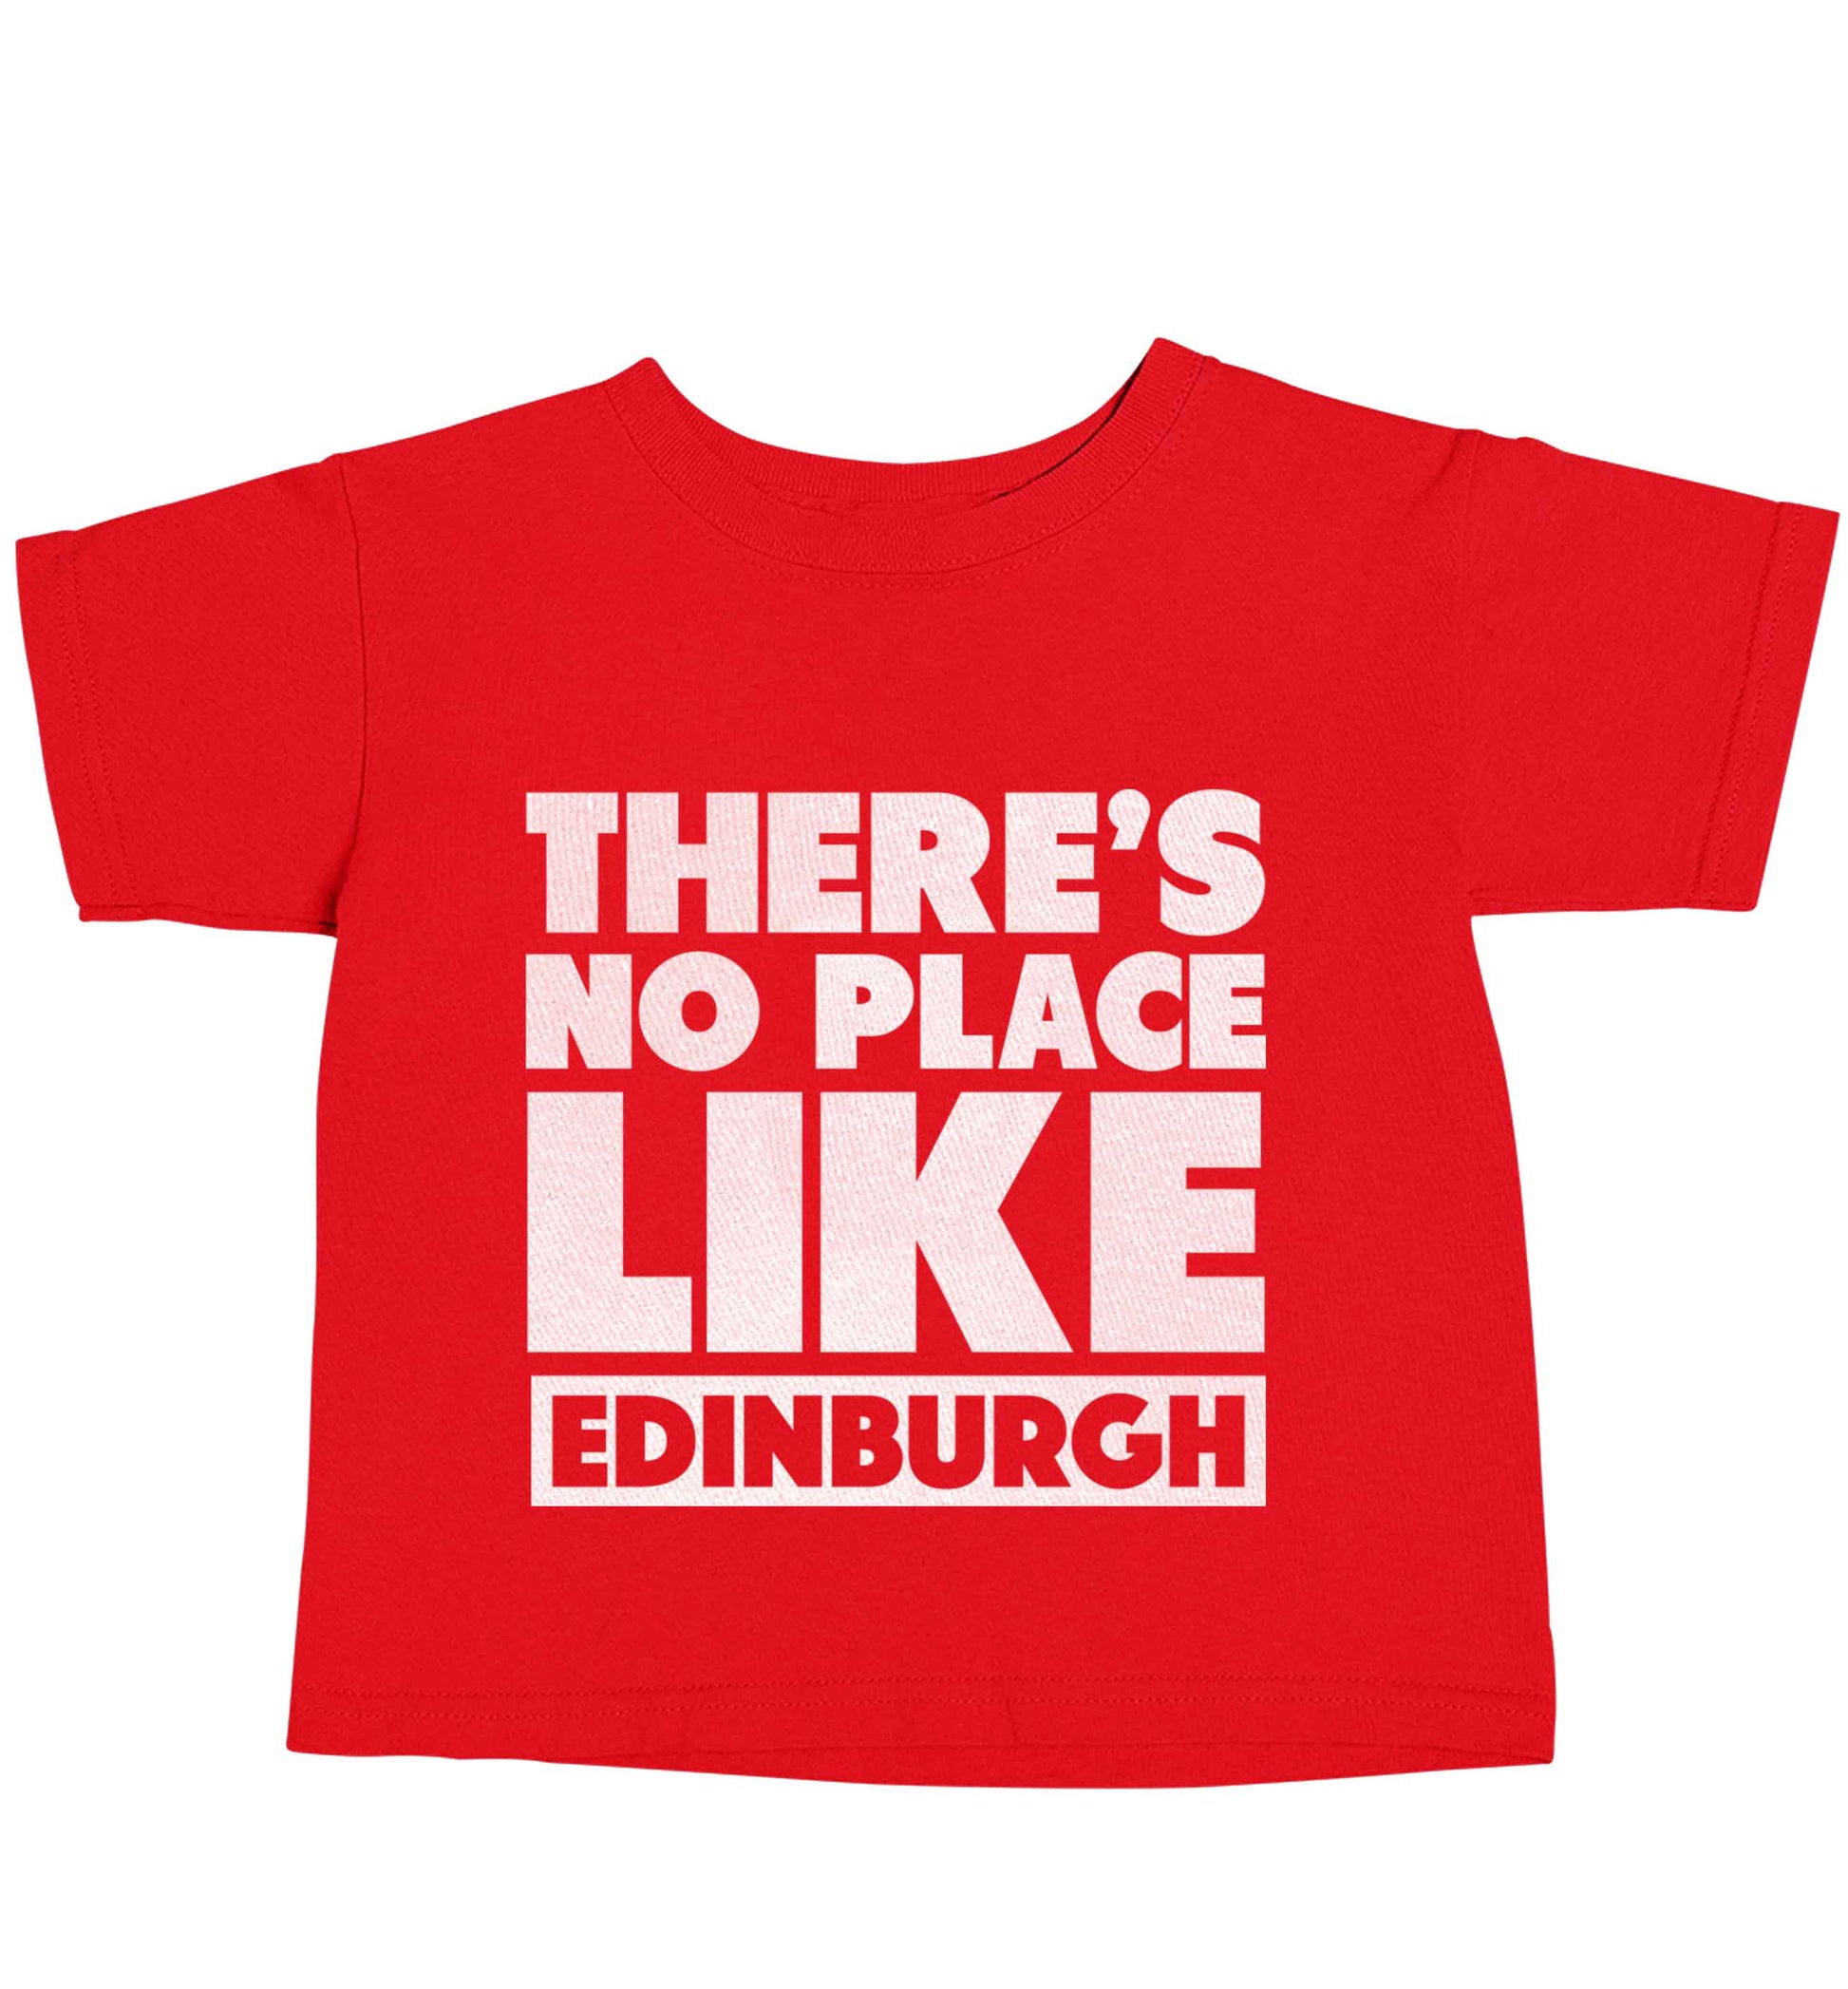 There's no place like Edinburgh red baby toddler Tshirt 2 Years